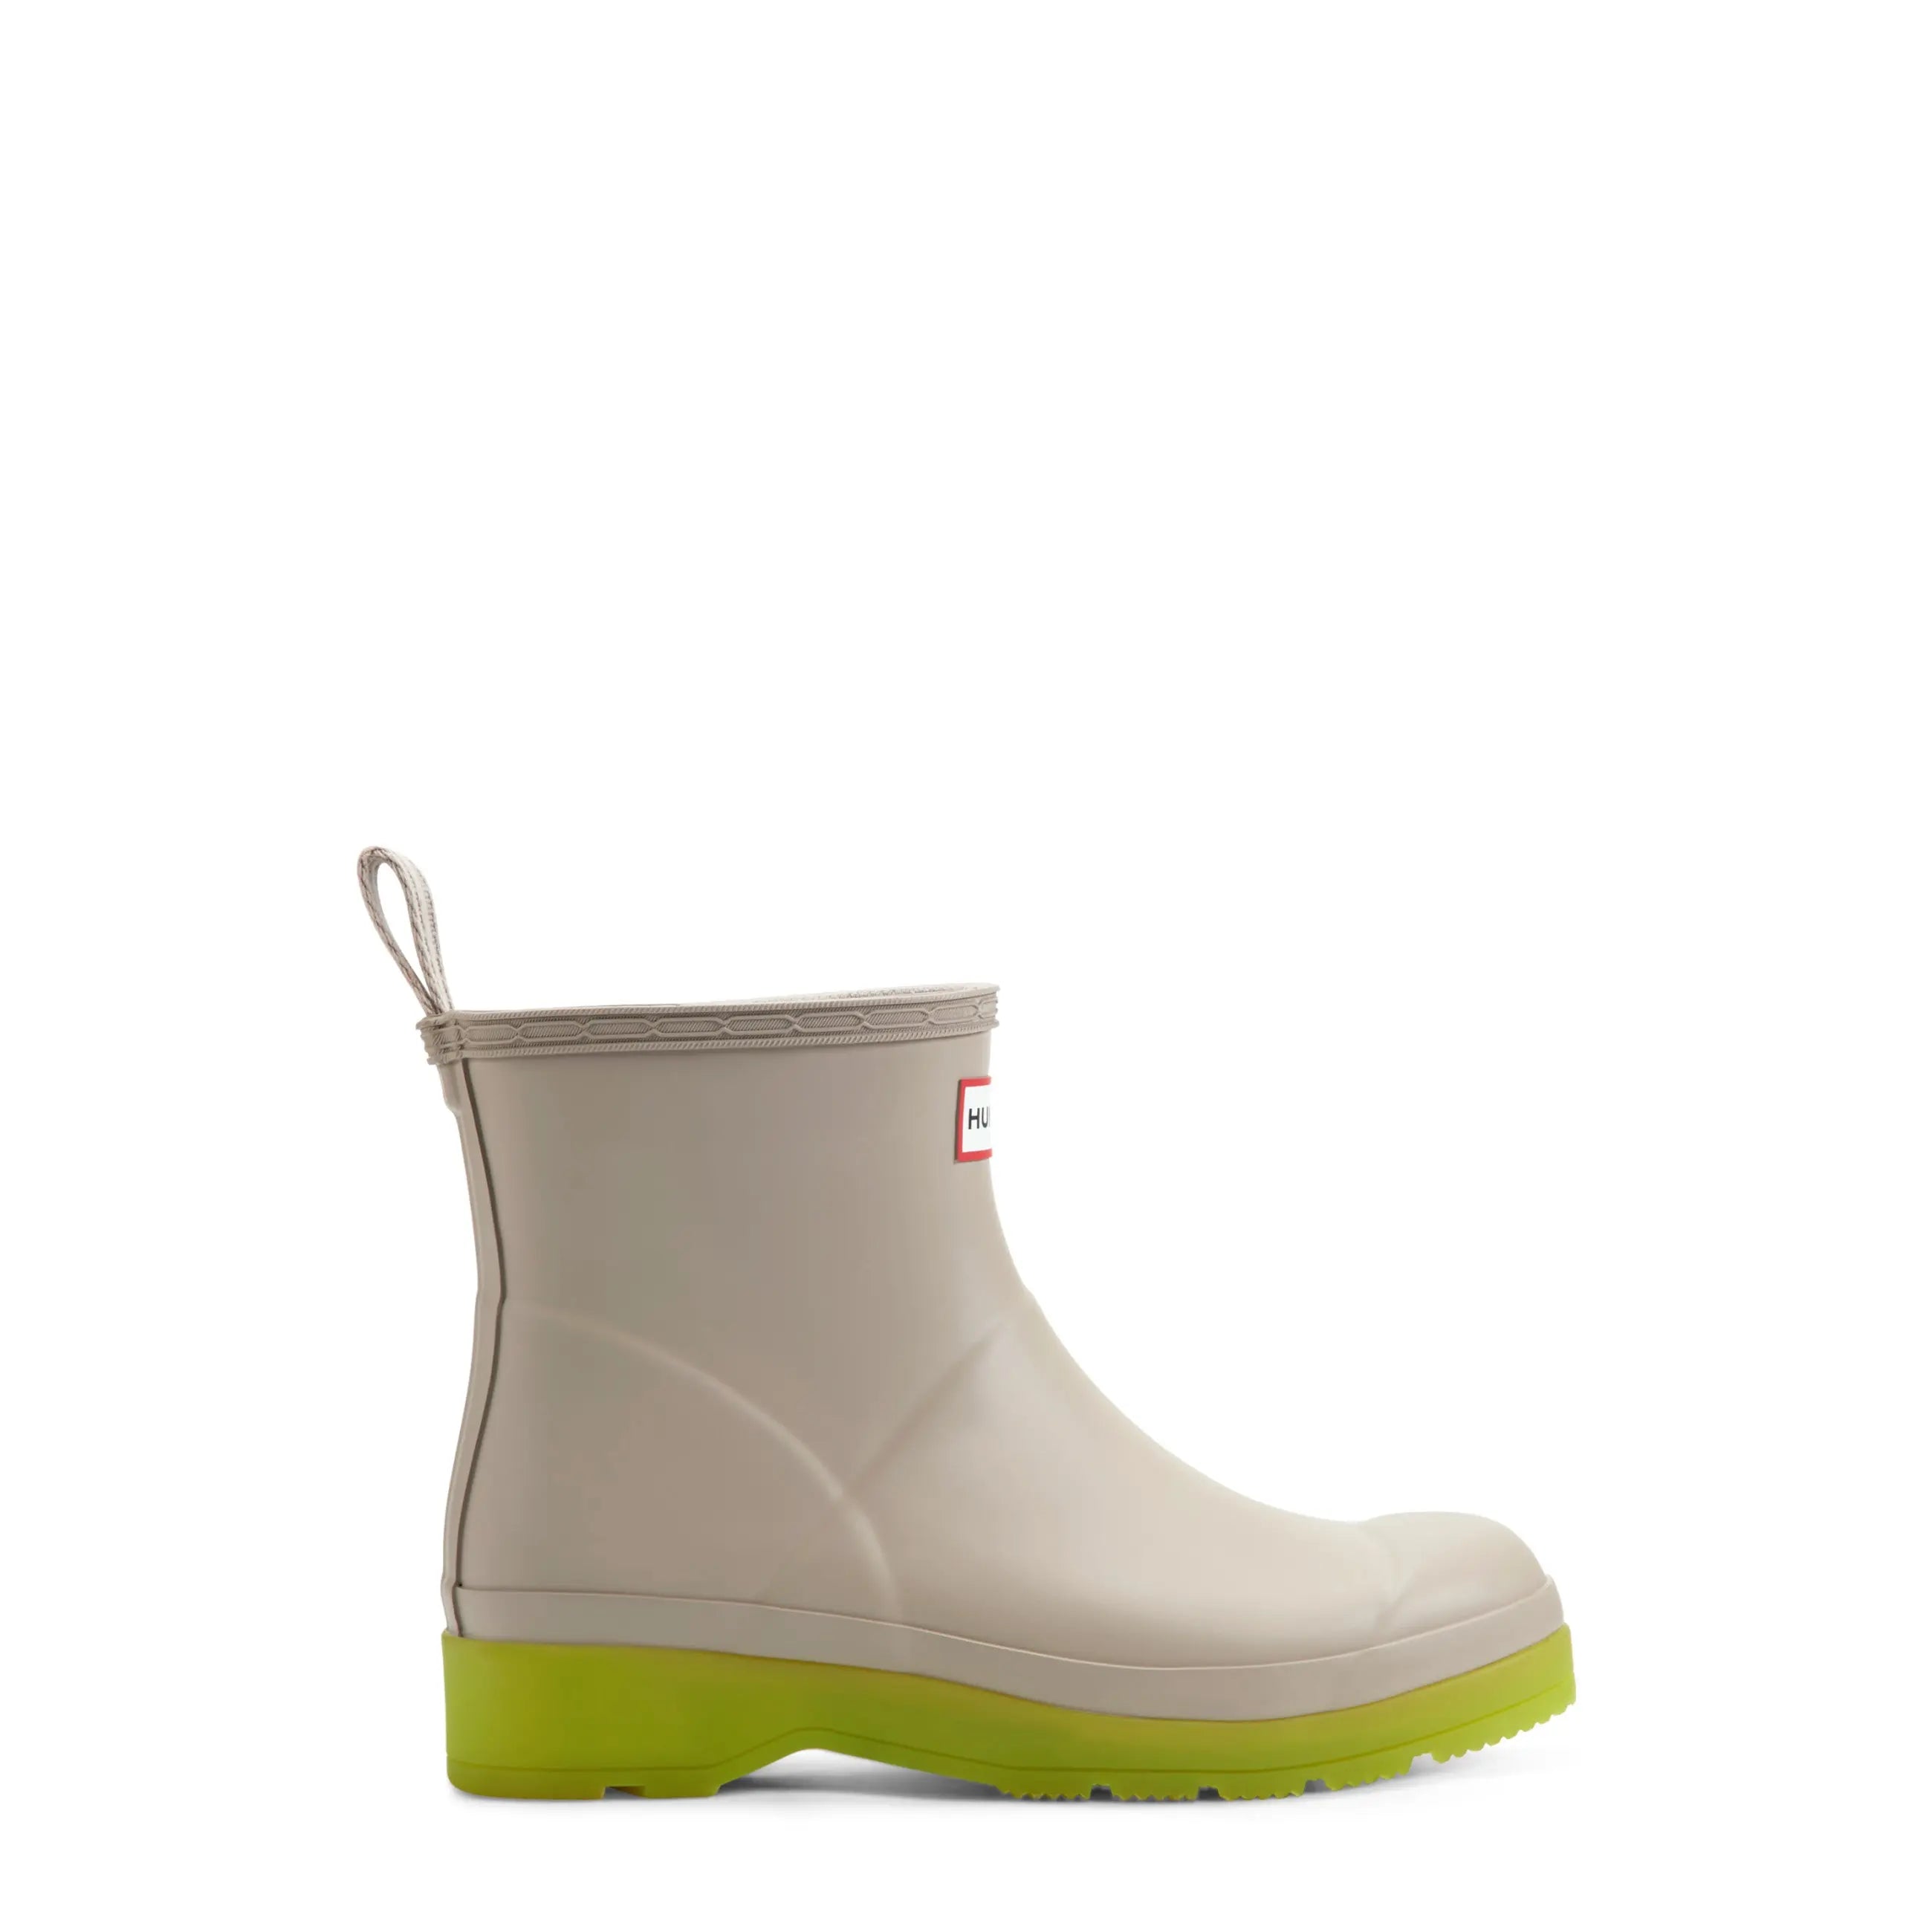 Hunter Boots - A 135 Year Legacy In Making The World's Best Rain Boots